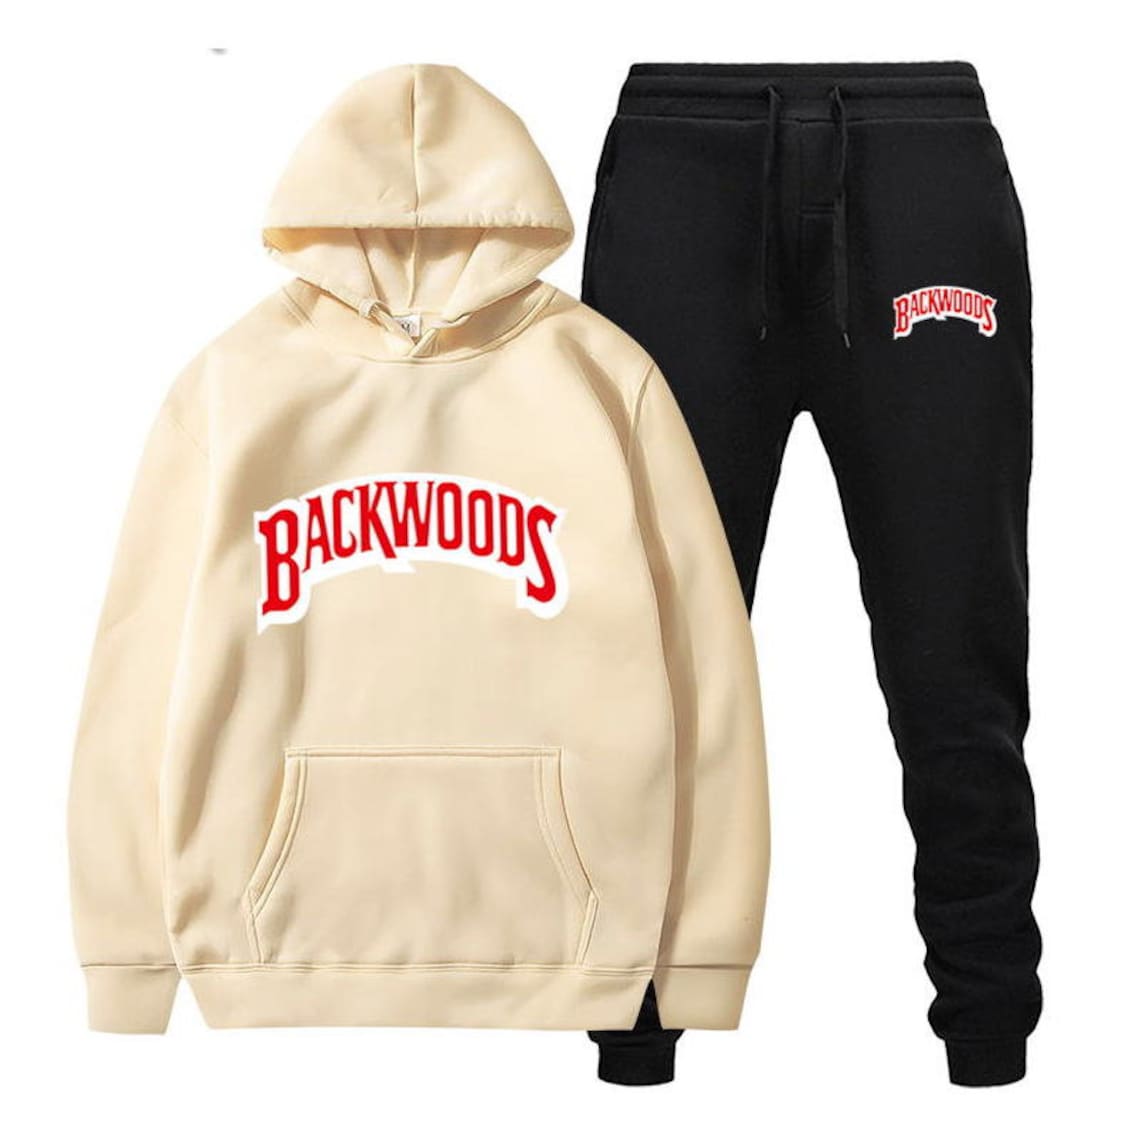 BACKWOODS Hoodie Joggers COMBO DEAL Backwoods Style Sweater | Etsy